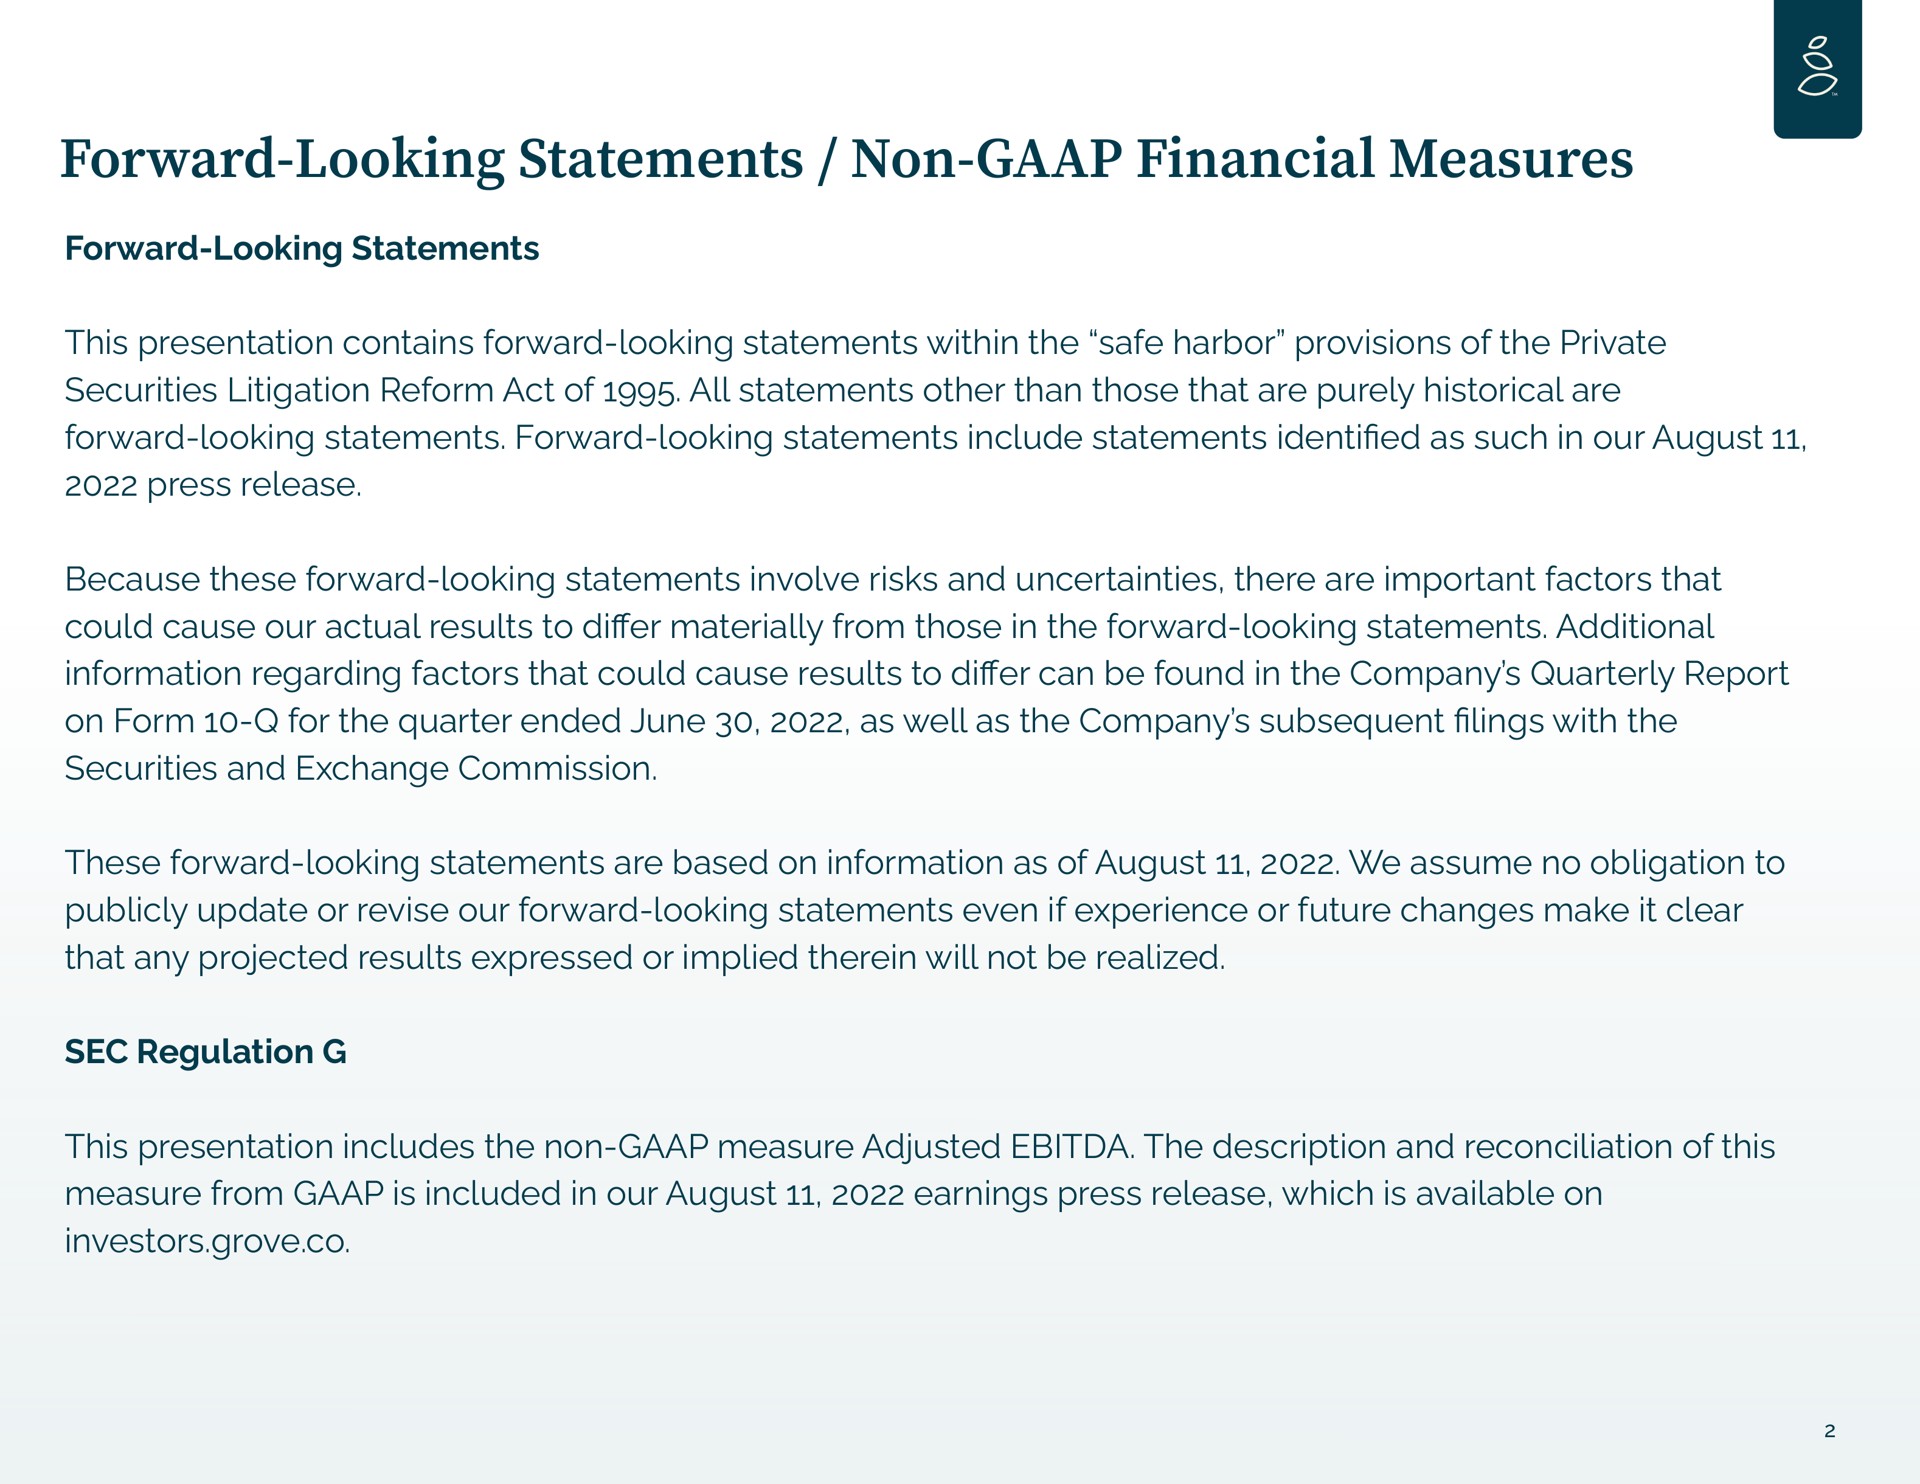 forward looking statements non financial measures forward looking statements this presentation contains forward looking statements within the safe harbor provisions of the private securities litigation reform act of all statements other than those that are purely historical are forward looking statements forward looking statements include statements as such in our august press release because these forward looking statements involve risks and uncertainties there are important factors that could cause our actual results to materially from those in the forward looking statements additional information regarding factors that could cause results to can be found in the company quarterly report on form for the quarter ended june as well as the company subsequent lings with the securities and exchange commission these forward looking statements are based on information as of august we assume no obligation to publicly update or revise our forward looking statements even if experience or future changes make it clear that any projected results expressed or implied therein will not be realized sec regulation this presentation includes the non measure adjusted the description and reconciliation of this measure from is included in our august earnings press release which is available on investors grove | Grove